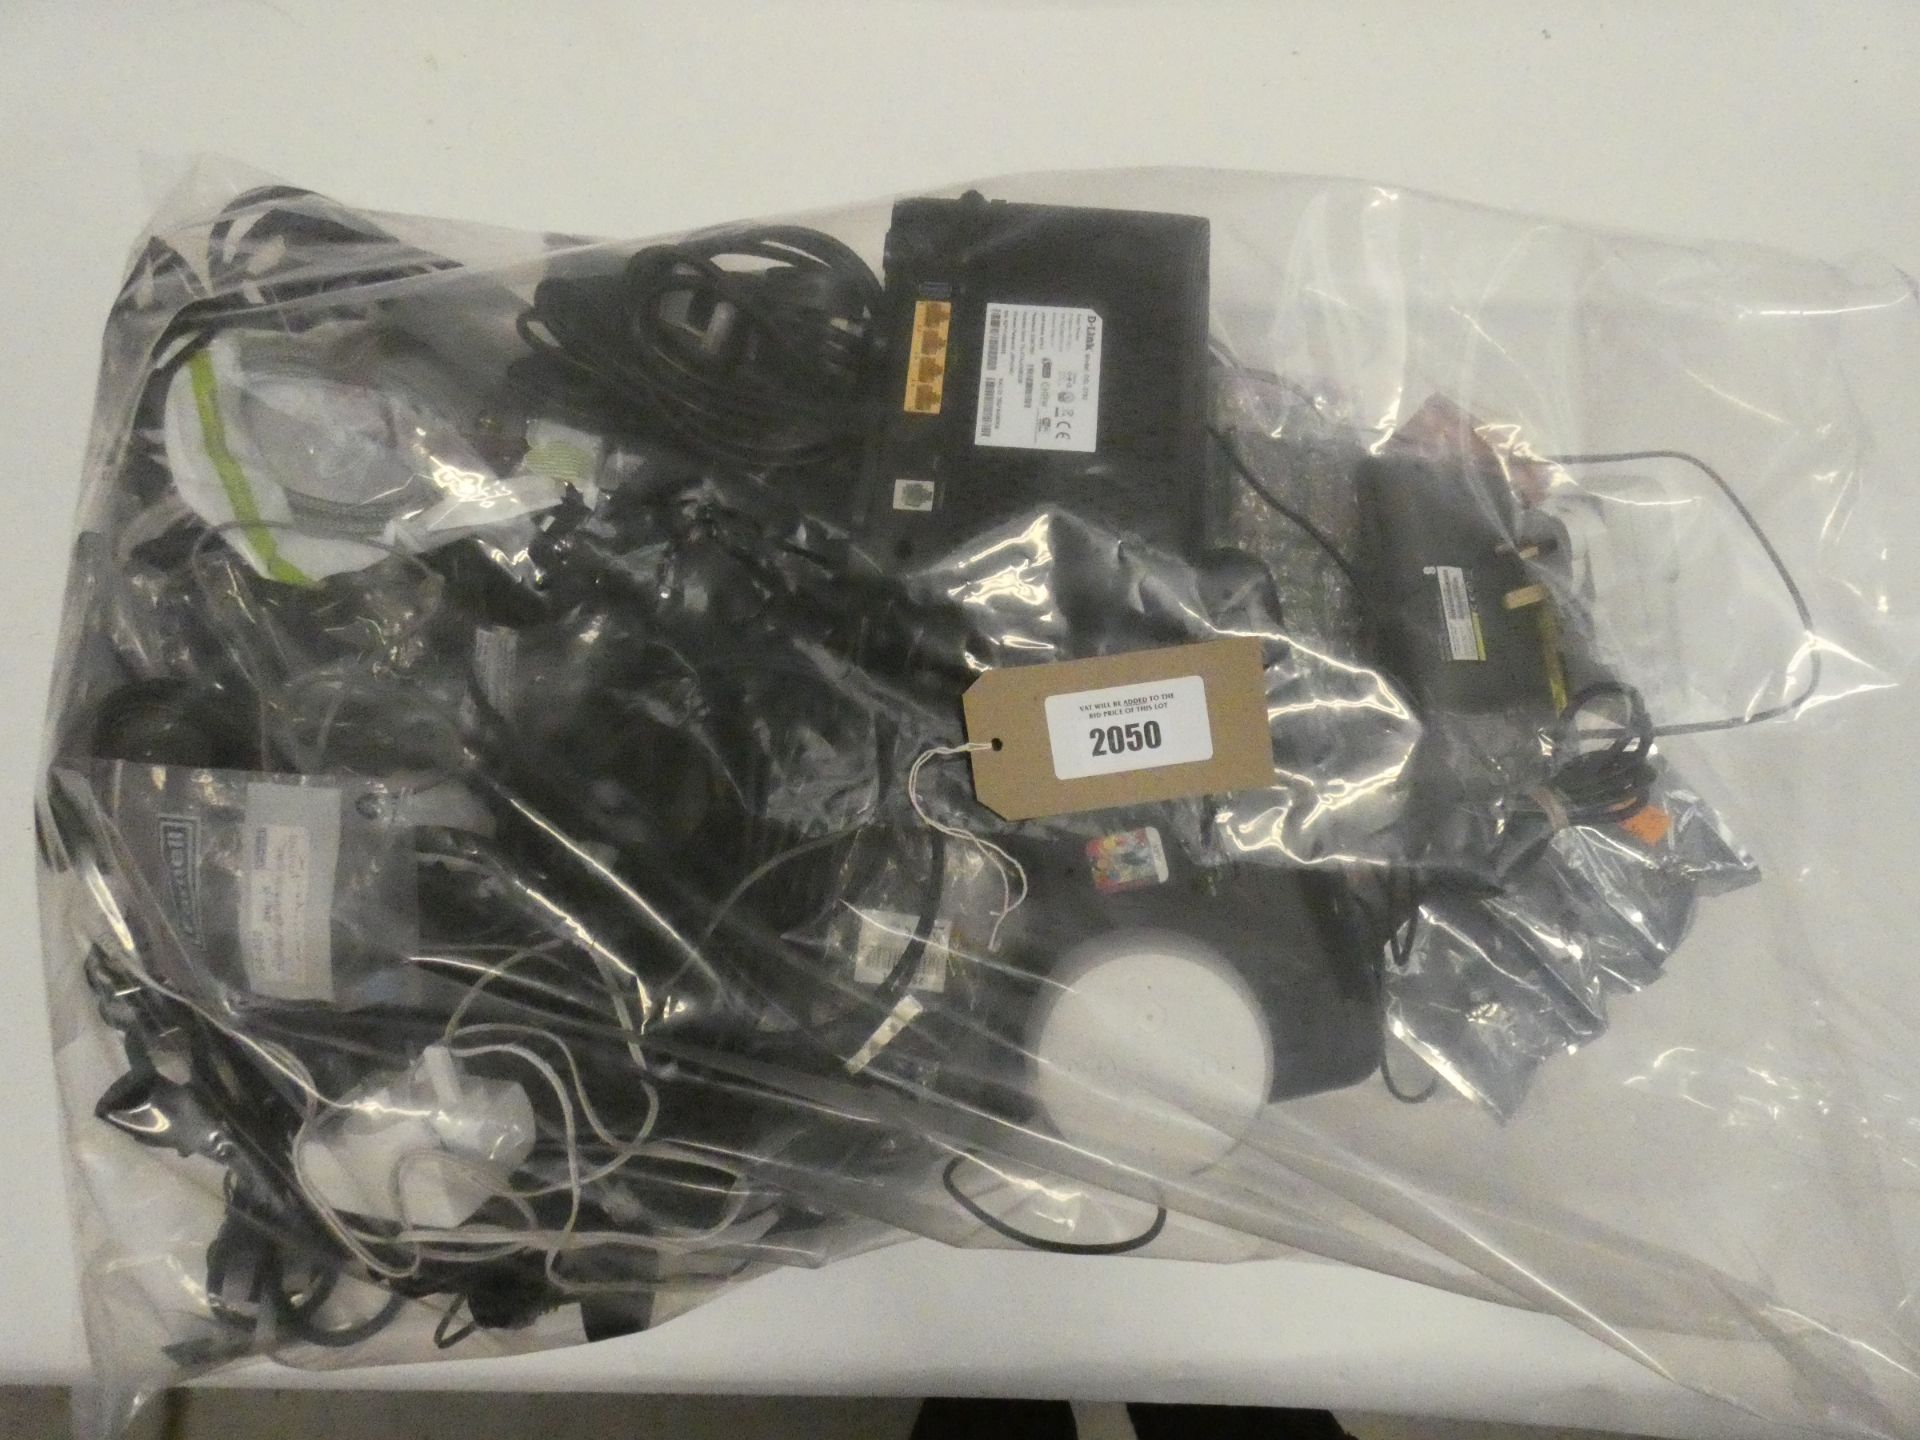 Bag containing mostly PSUs, leads, cables plus routers and other miscellaneous devices